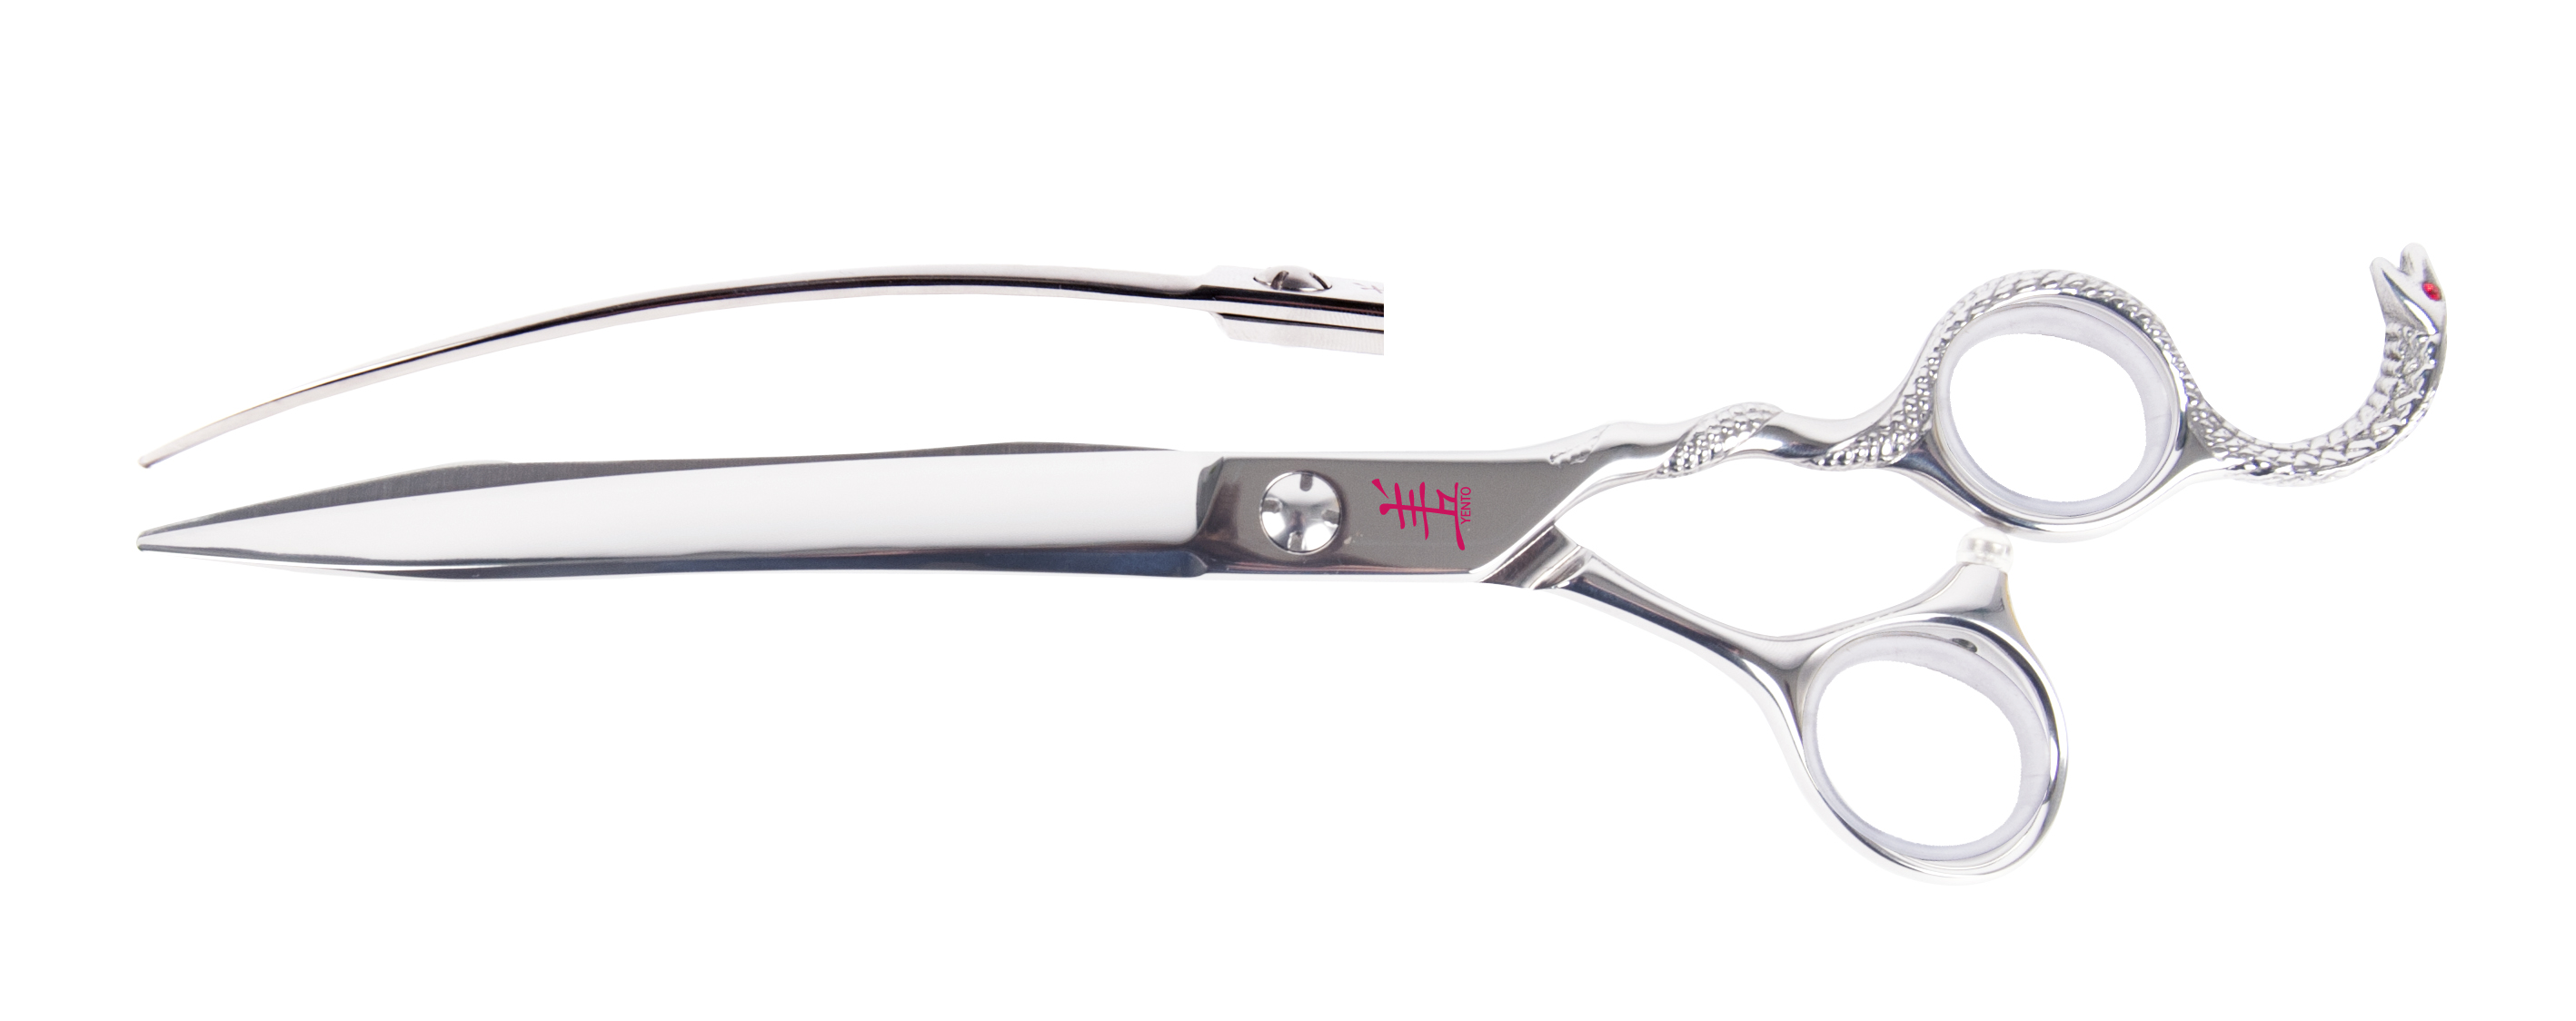 The different types of dog grooming scissors: straight scissors, curved  scissors, thinning scissors, blenders and chunkers - Transgroom - Pet Care  Professionals